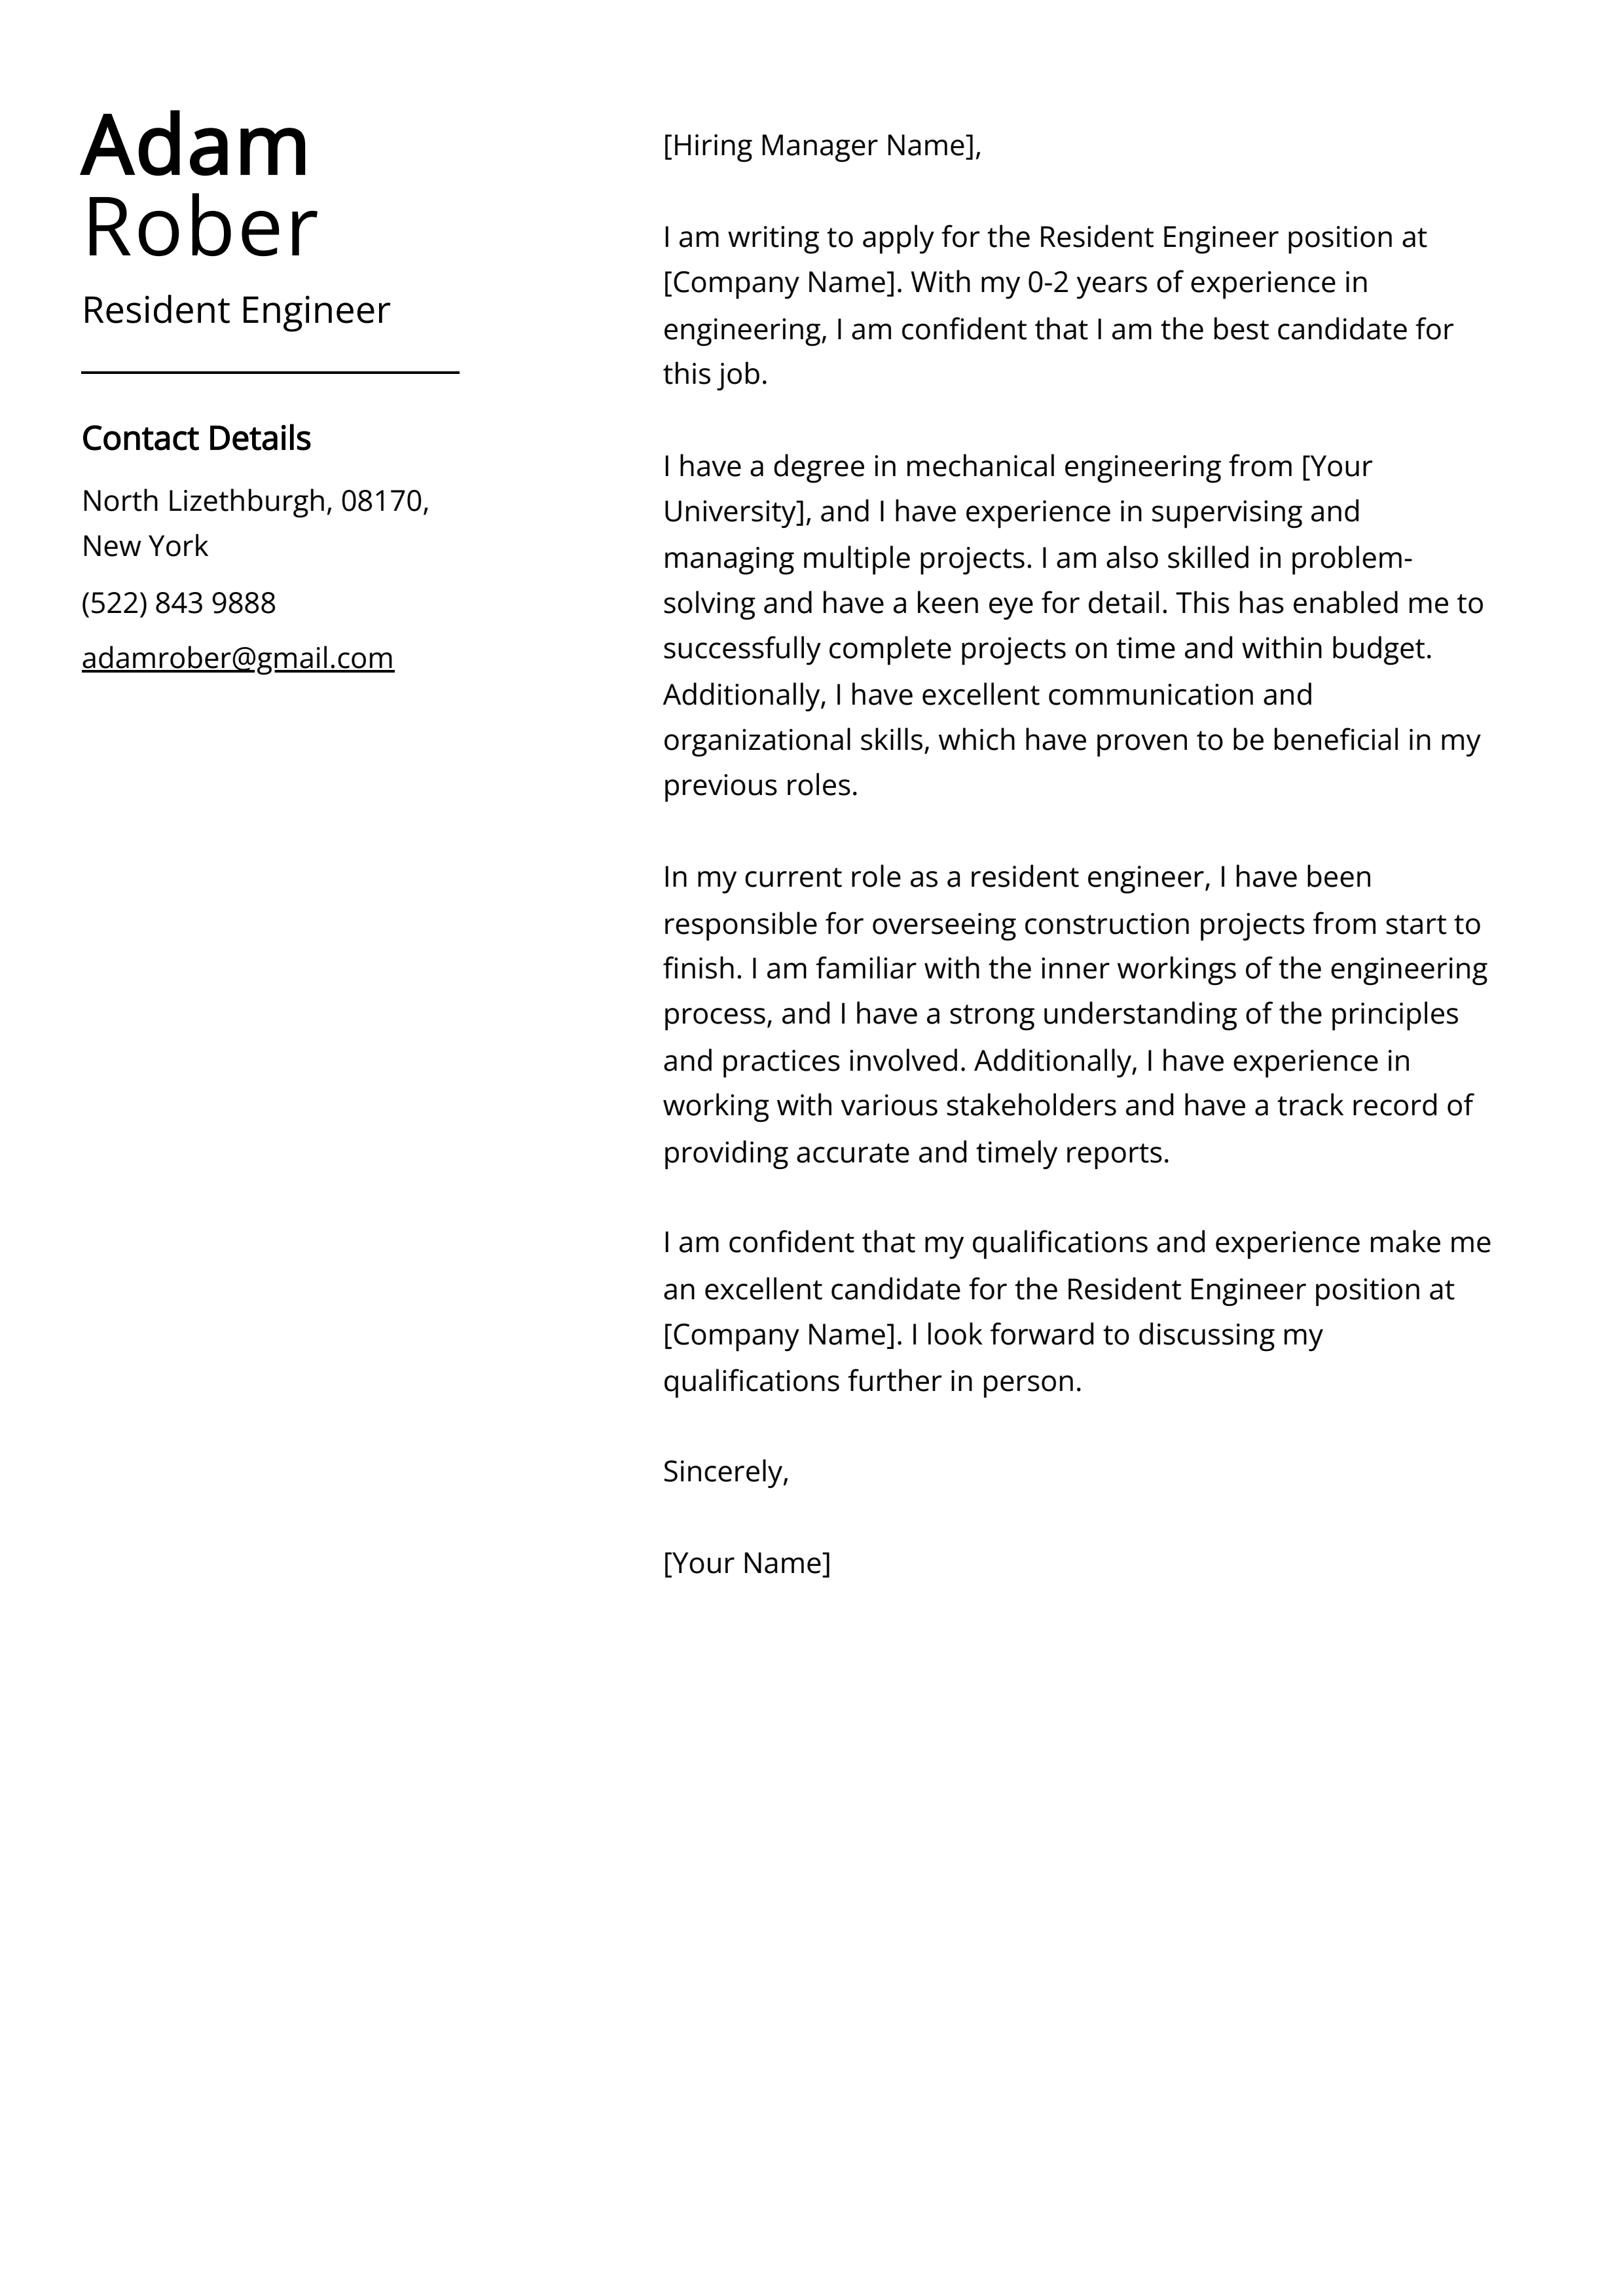 Resident Engineer Cover Letter Example